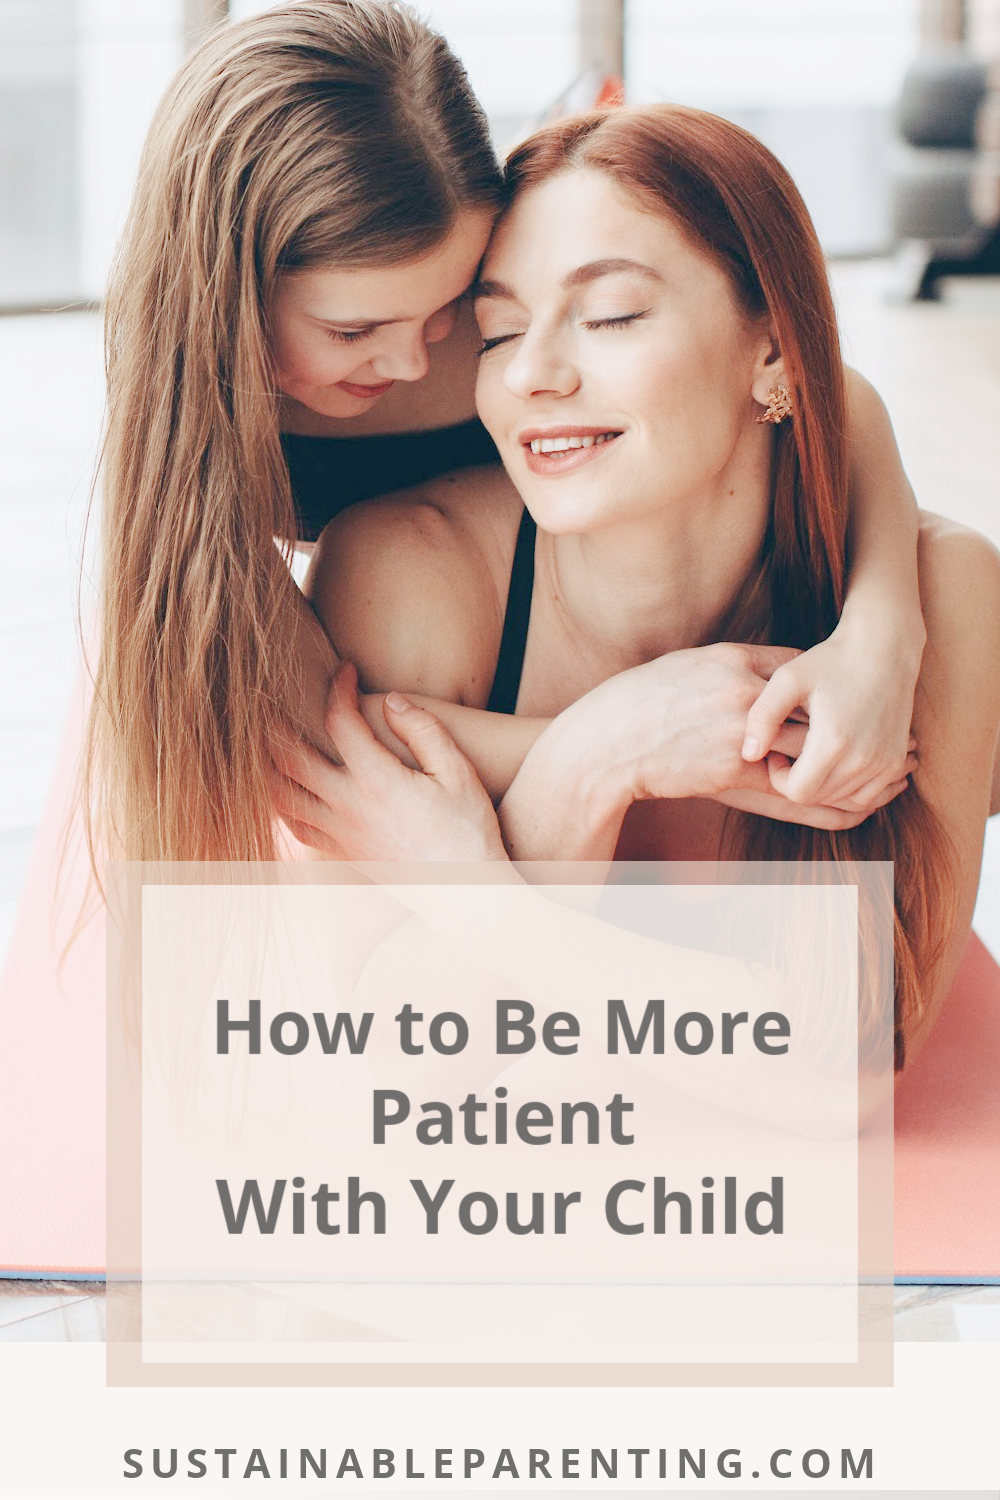 How to Be More Patient With Your Child